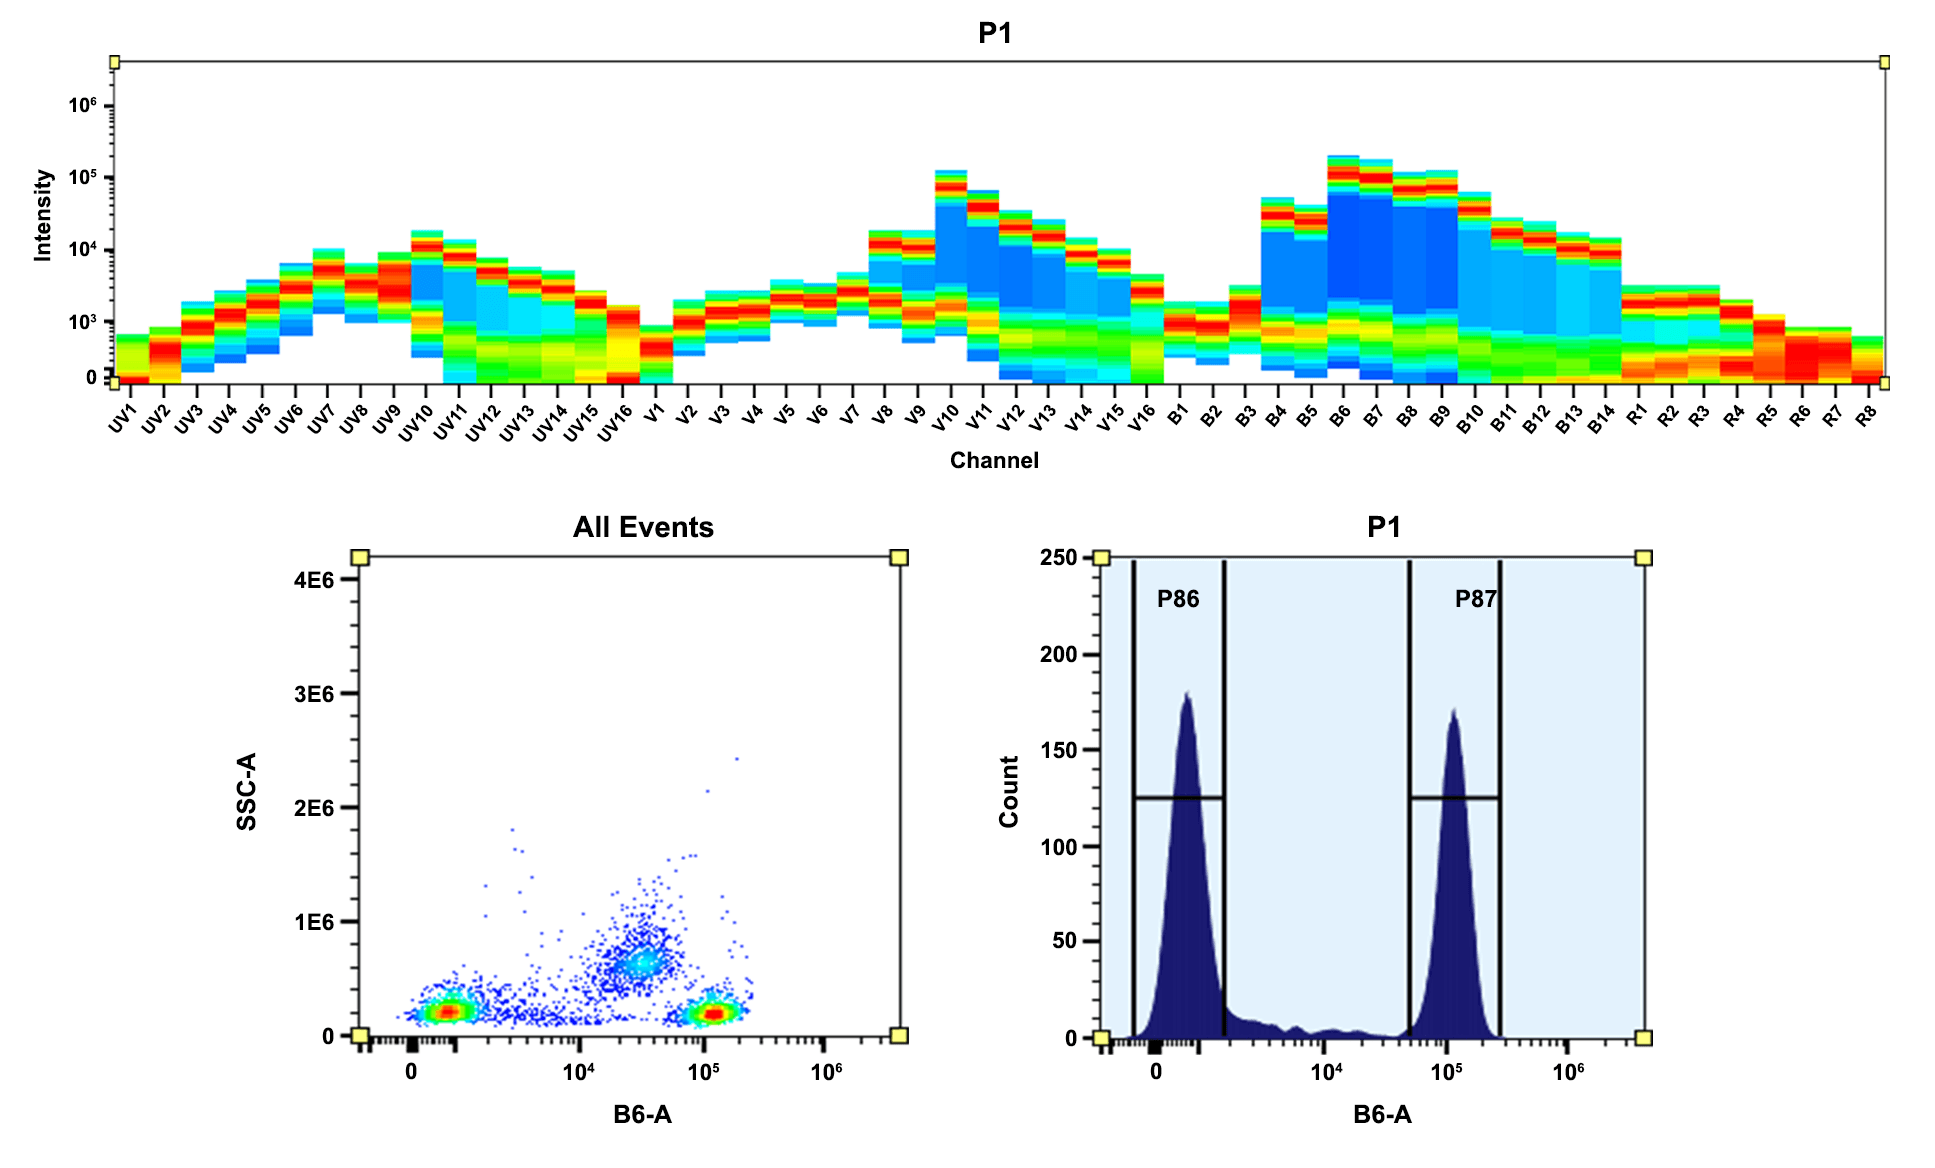 Top) Spectral pattern was generated using a 4-laser spectral cytometer. Spatially offset lasers (355 nm, 405 nm, 488 nm, and 640 nm) were used to create four distinct emission profiles, then, when combined, yielded the overall spectral signature. Bottom) Flow cytometry analysis of whole blood cells stained with PE/iFluor® 610 anti-human CD4 *SK3* conjugate. The fluorescence signal was monitored using an Aurora flow cytometer in the PE/iFluor® 610 specific B6-A channel.